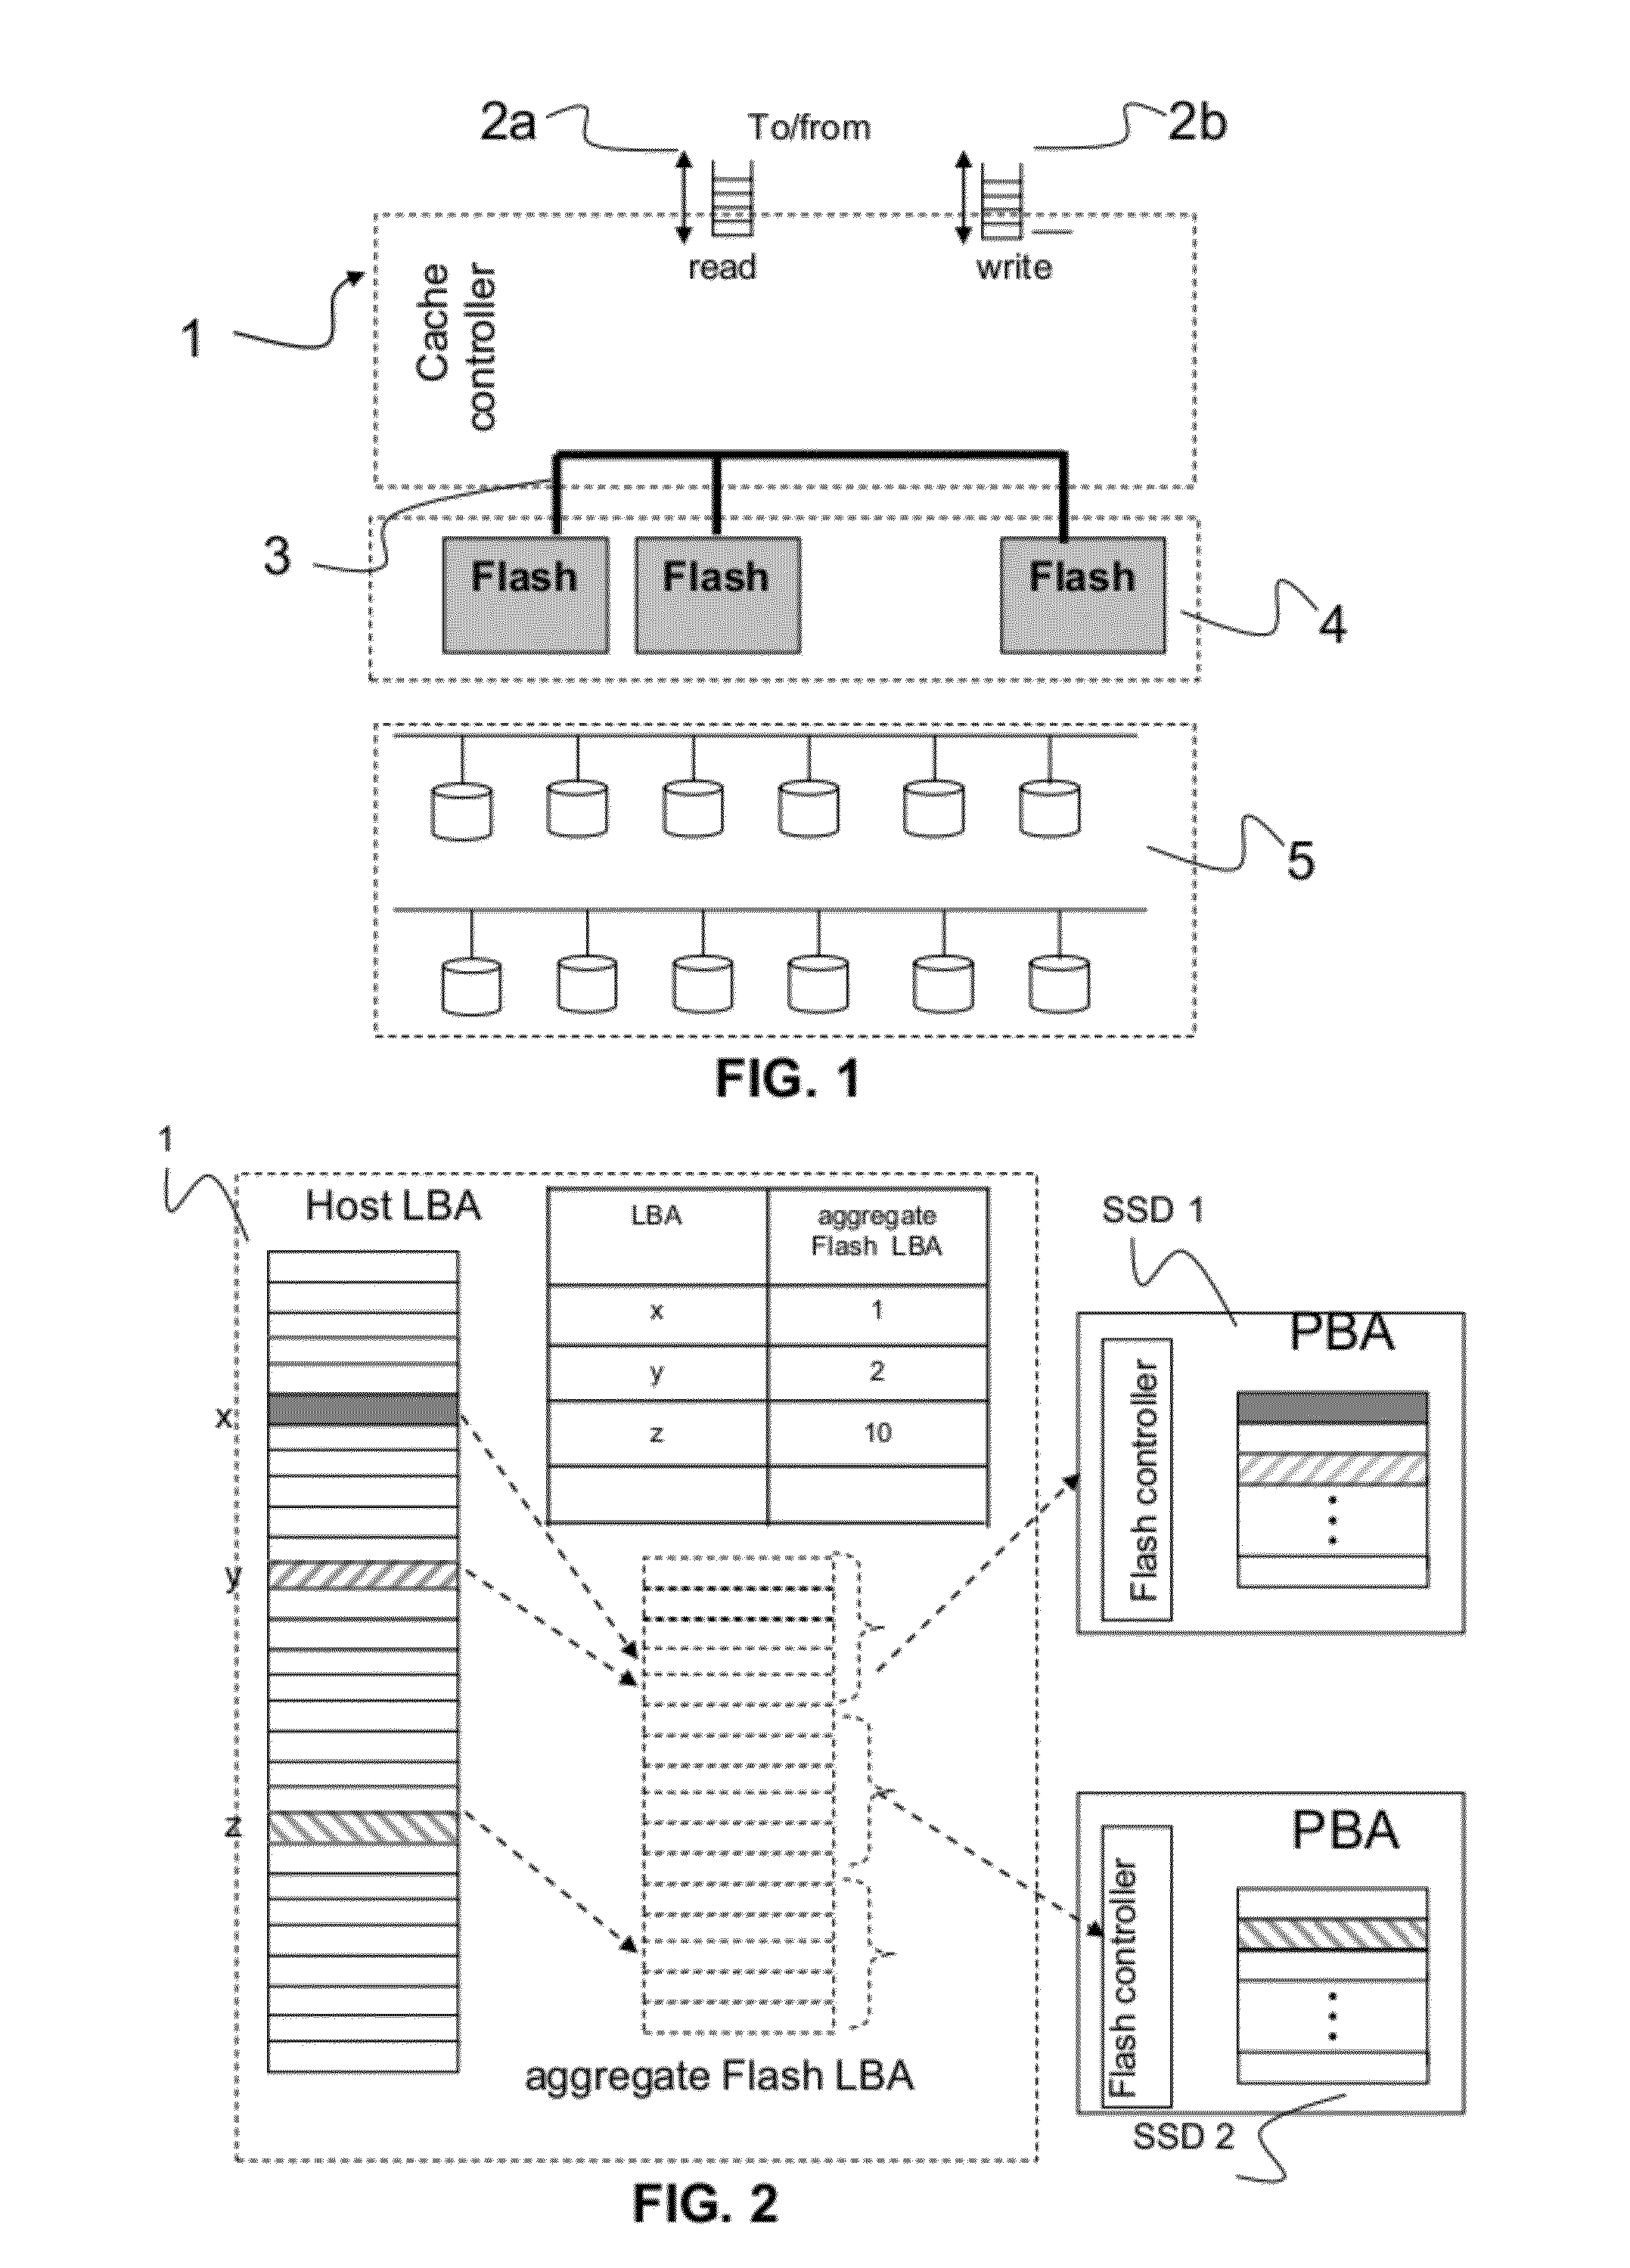 Management of cache memory in a flash cache architecture